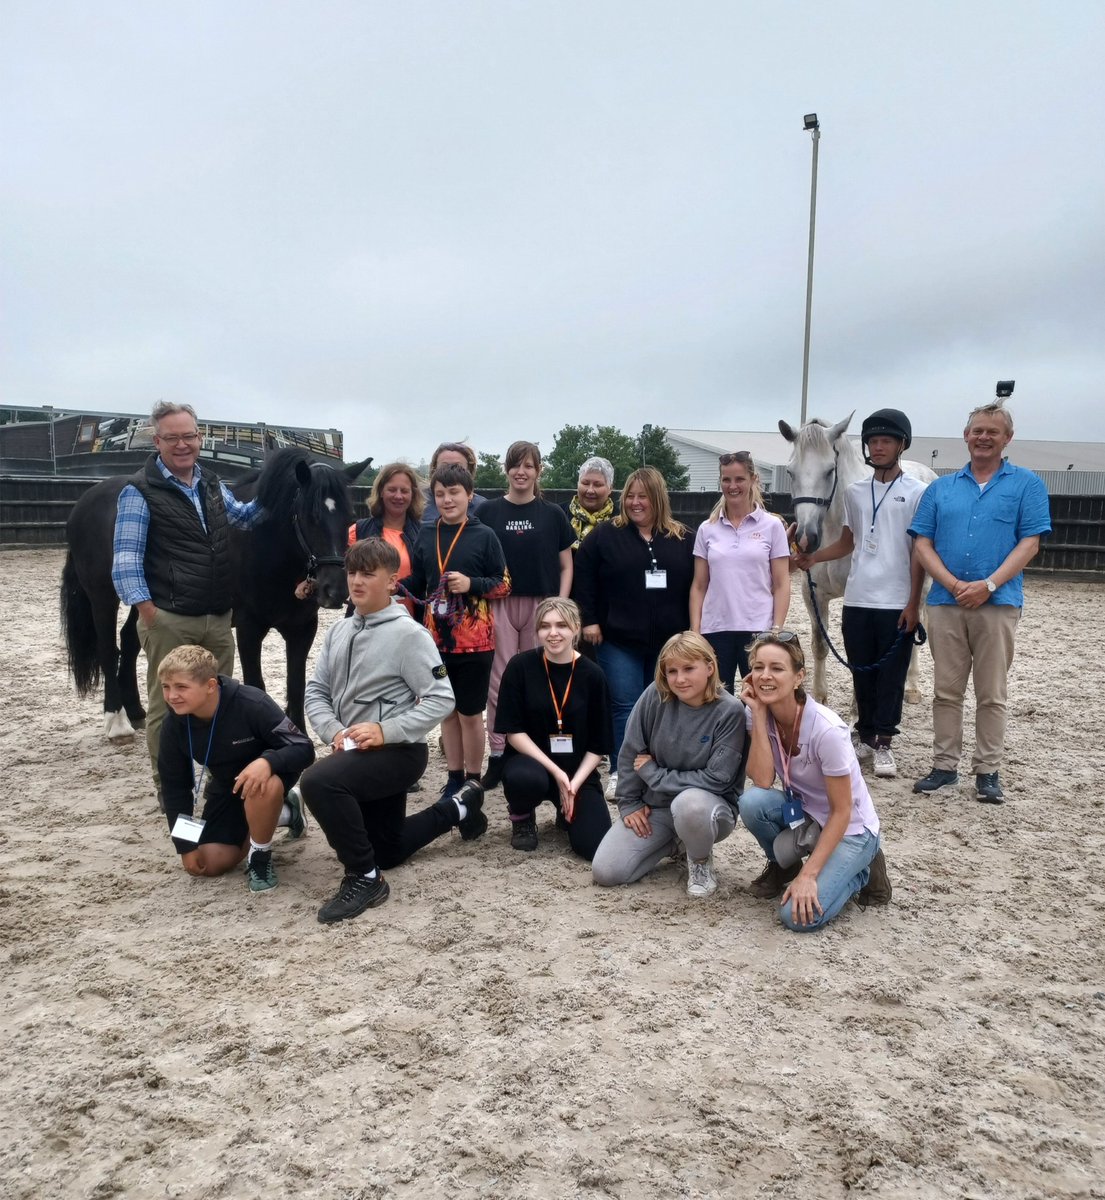 We welcomed our president Martin Clunes to RAC Saddle Club yesterday to mark an exciting partnership with Lead Up International 🤝 

It showcased how truly powerful that #horsehumanbond is 🐴💛

Together, we can continue to Change Lives Through Horses 👉 bhs.org.uk/support-us/our…